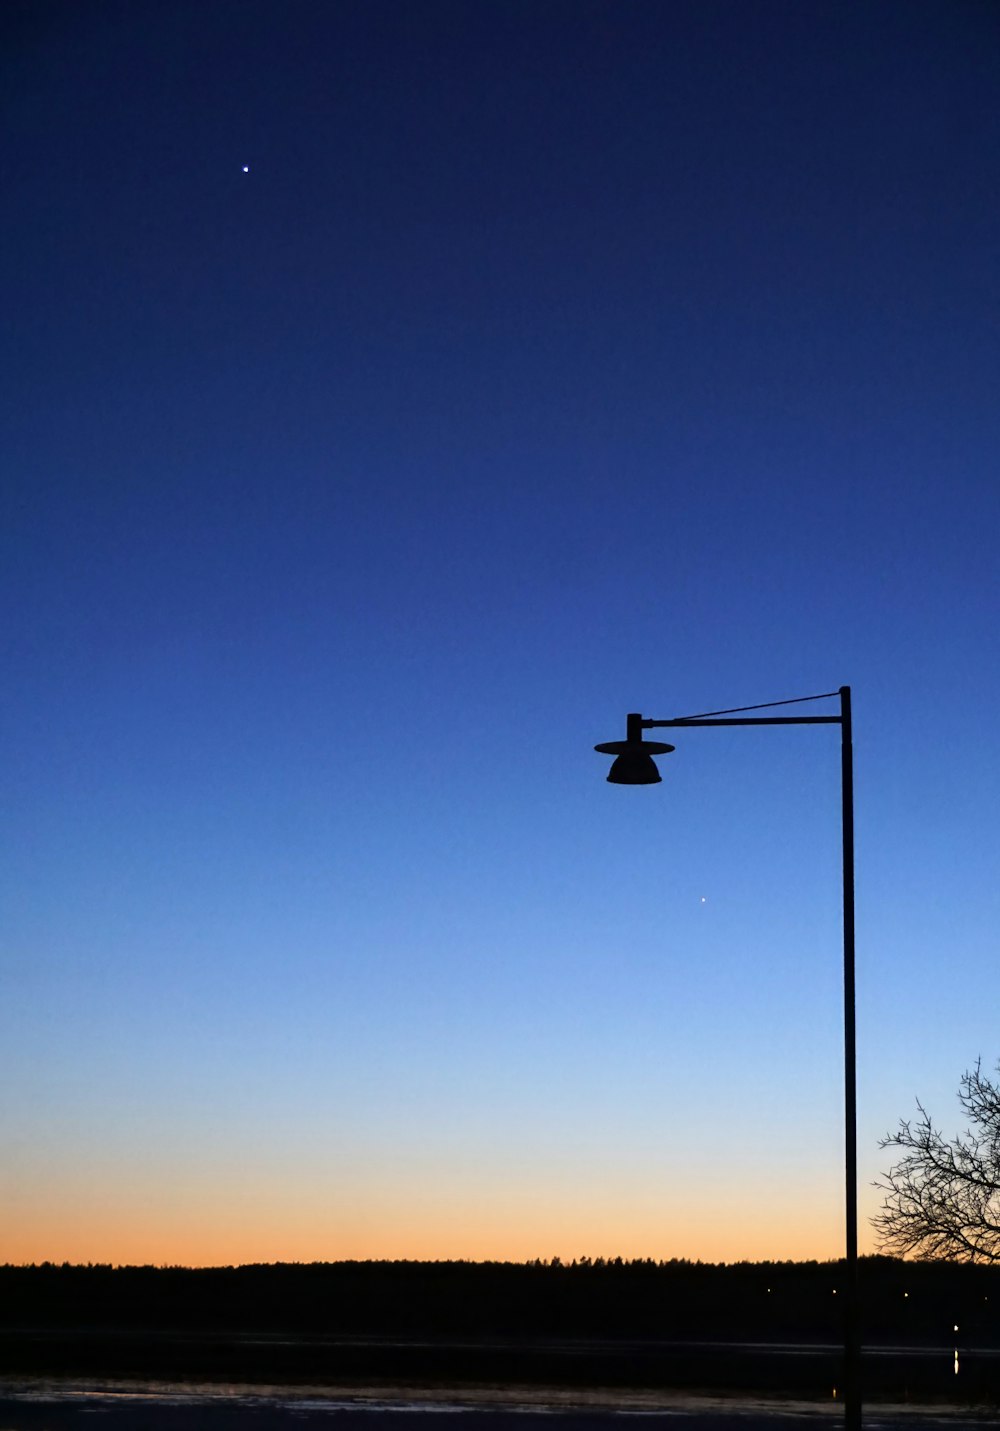 a street light on a pole with a sky in the background